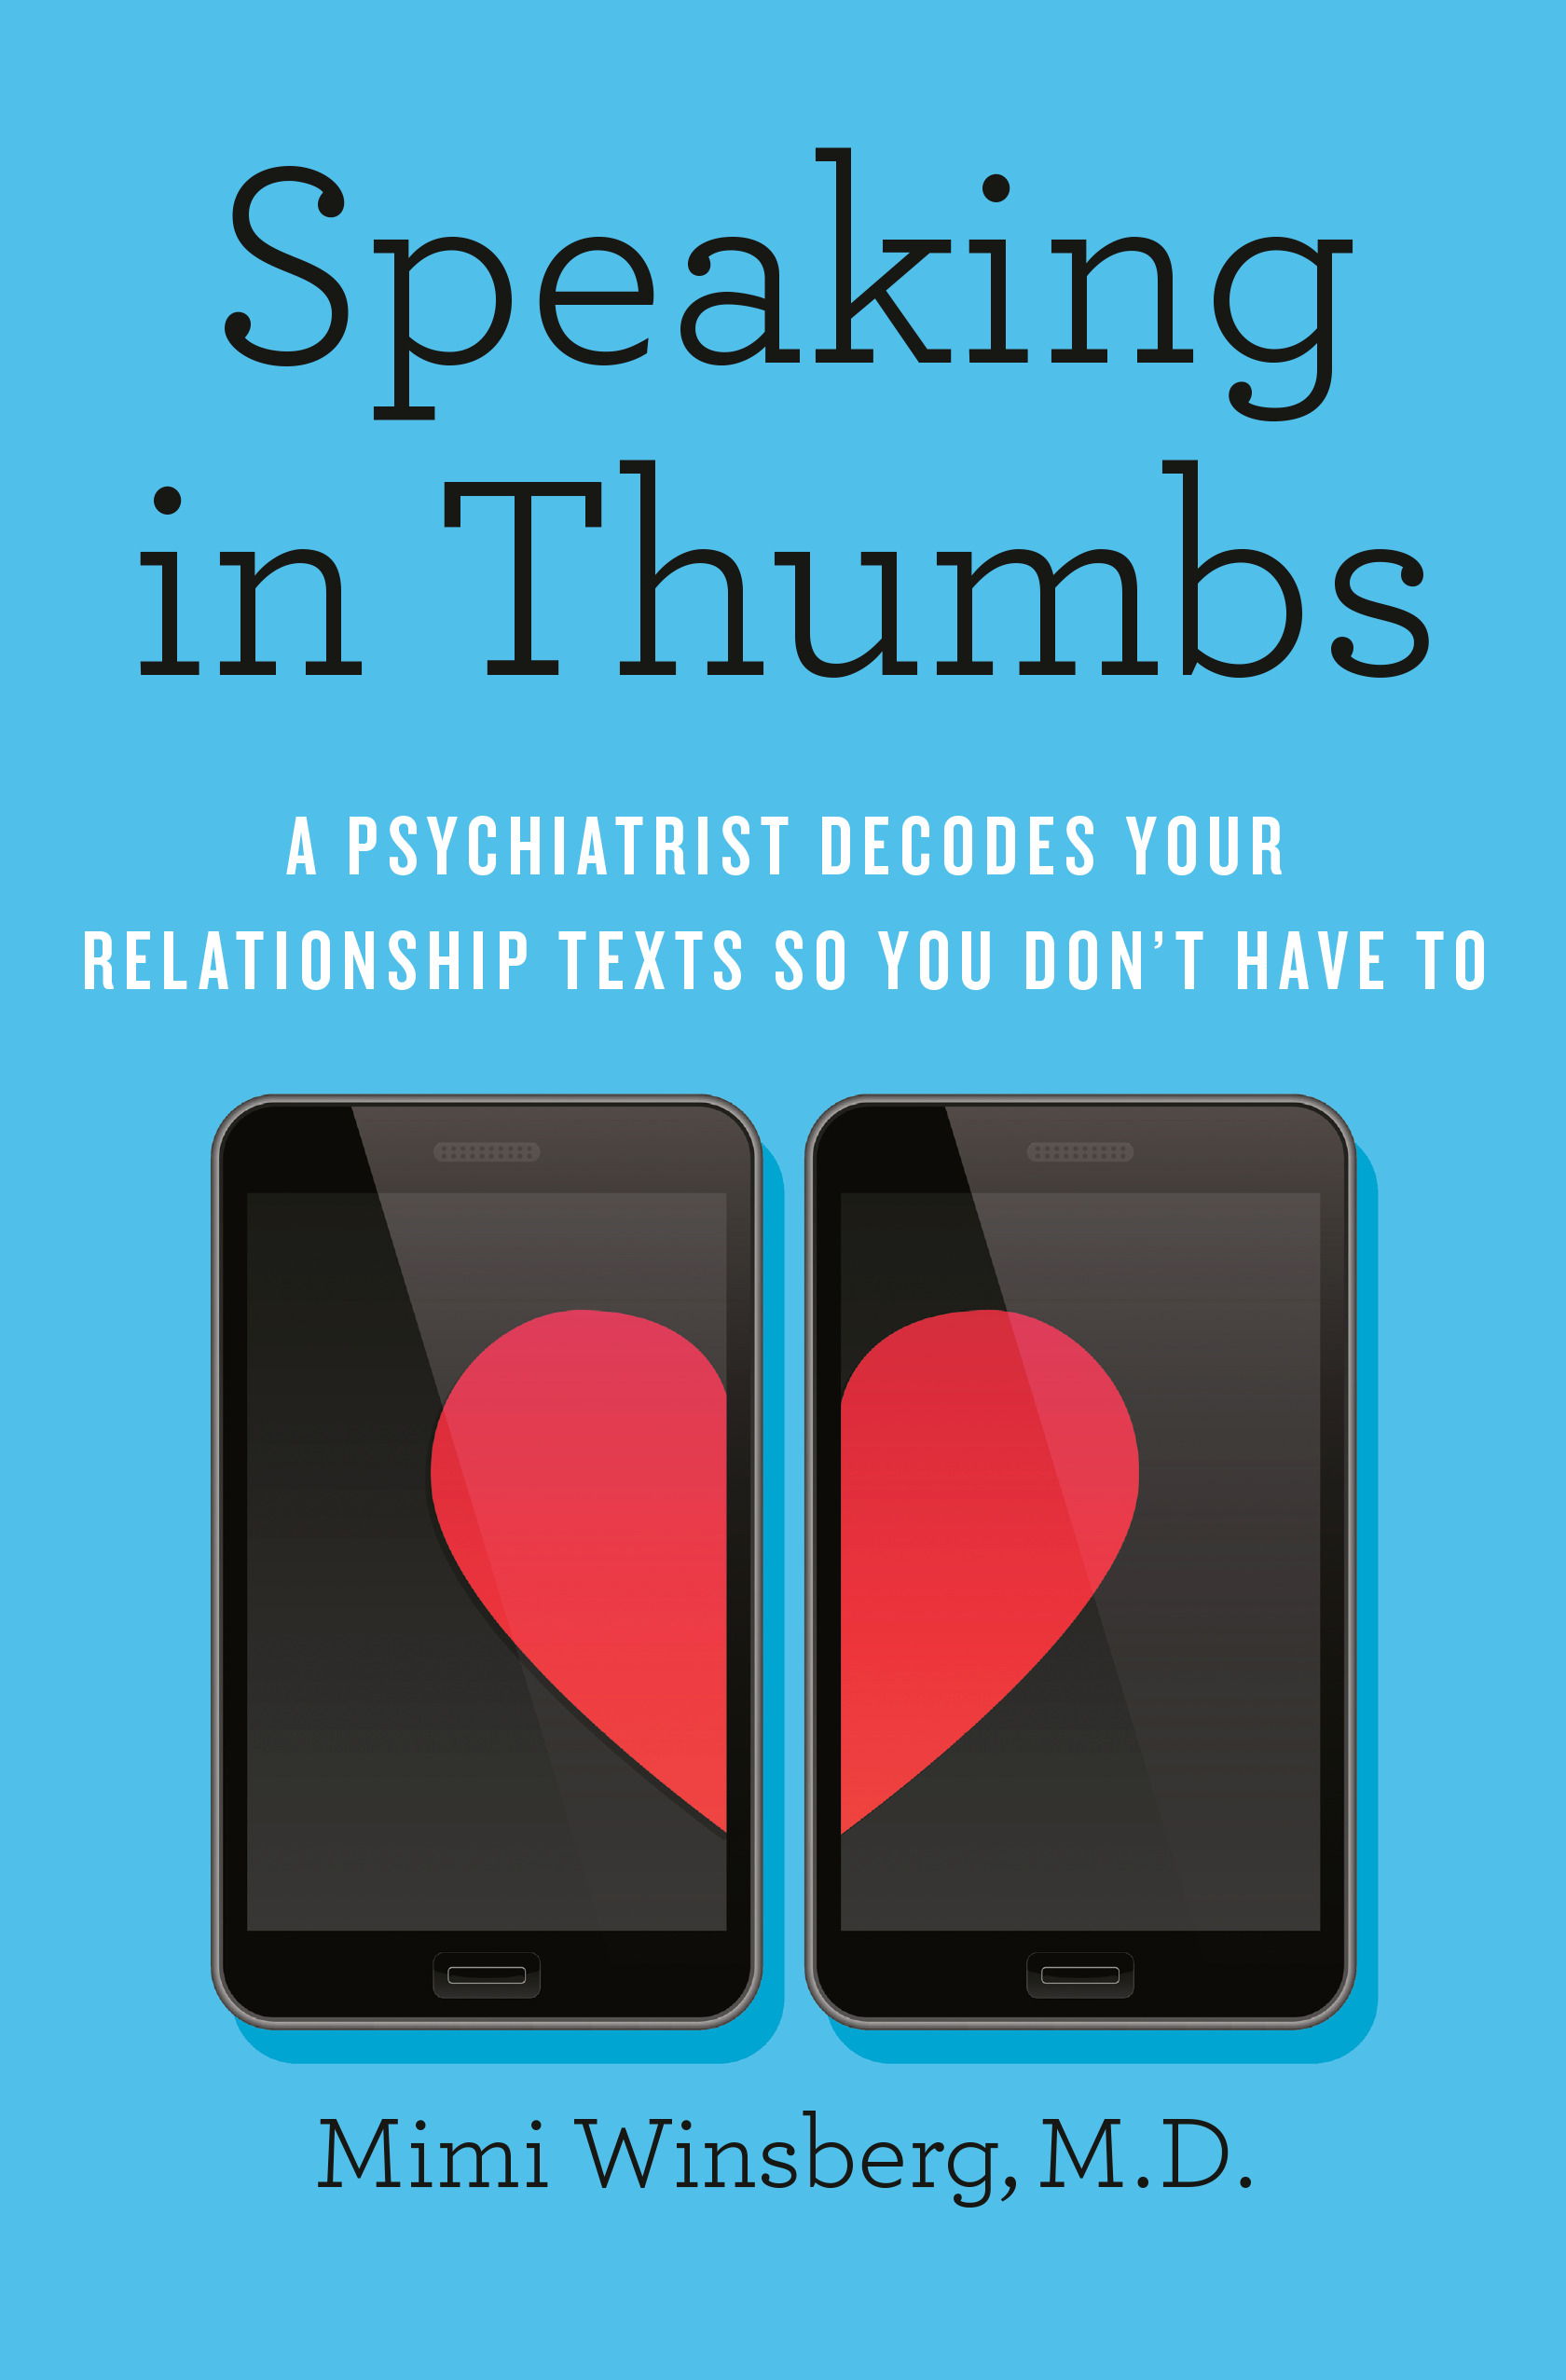 Speaking in Thumbs : A Psychiatrist Decodes Your Relationship Texts So You Don't Have To | Psychology & Self-Improvement